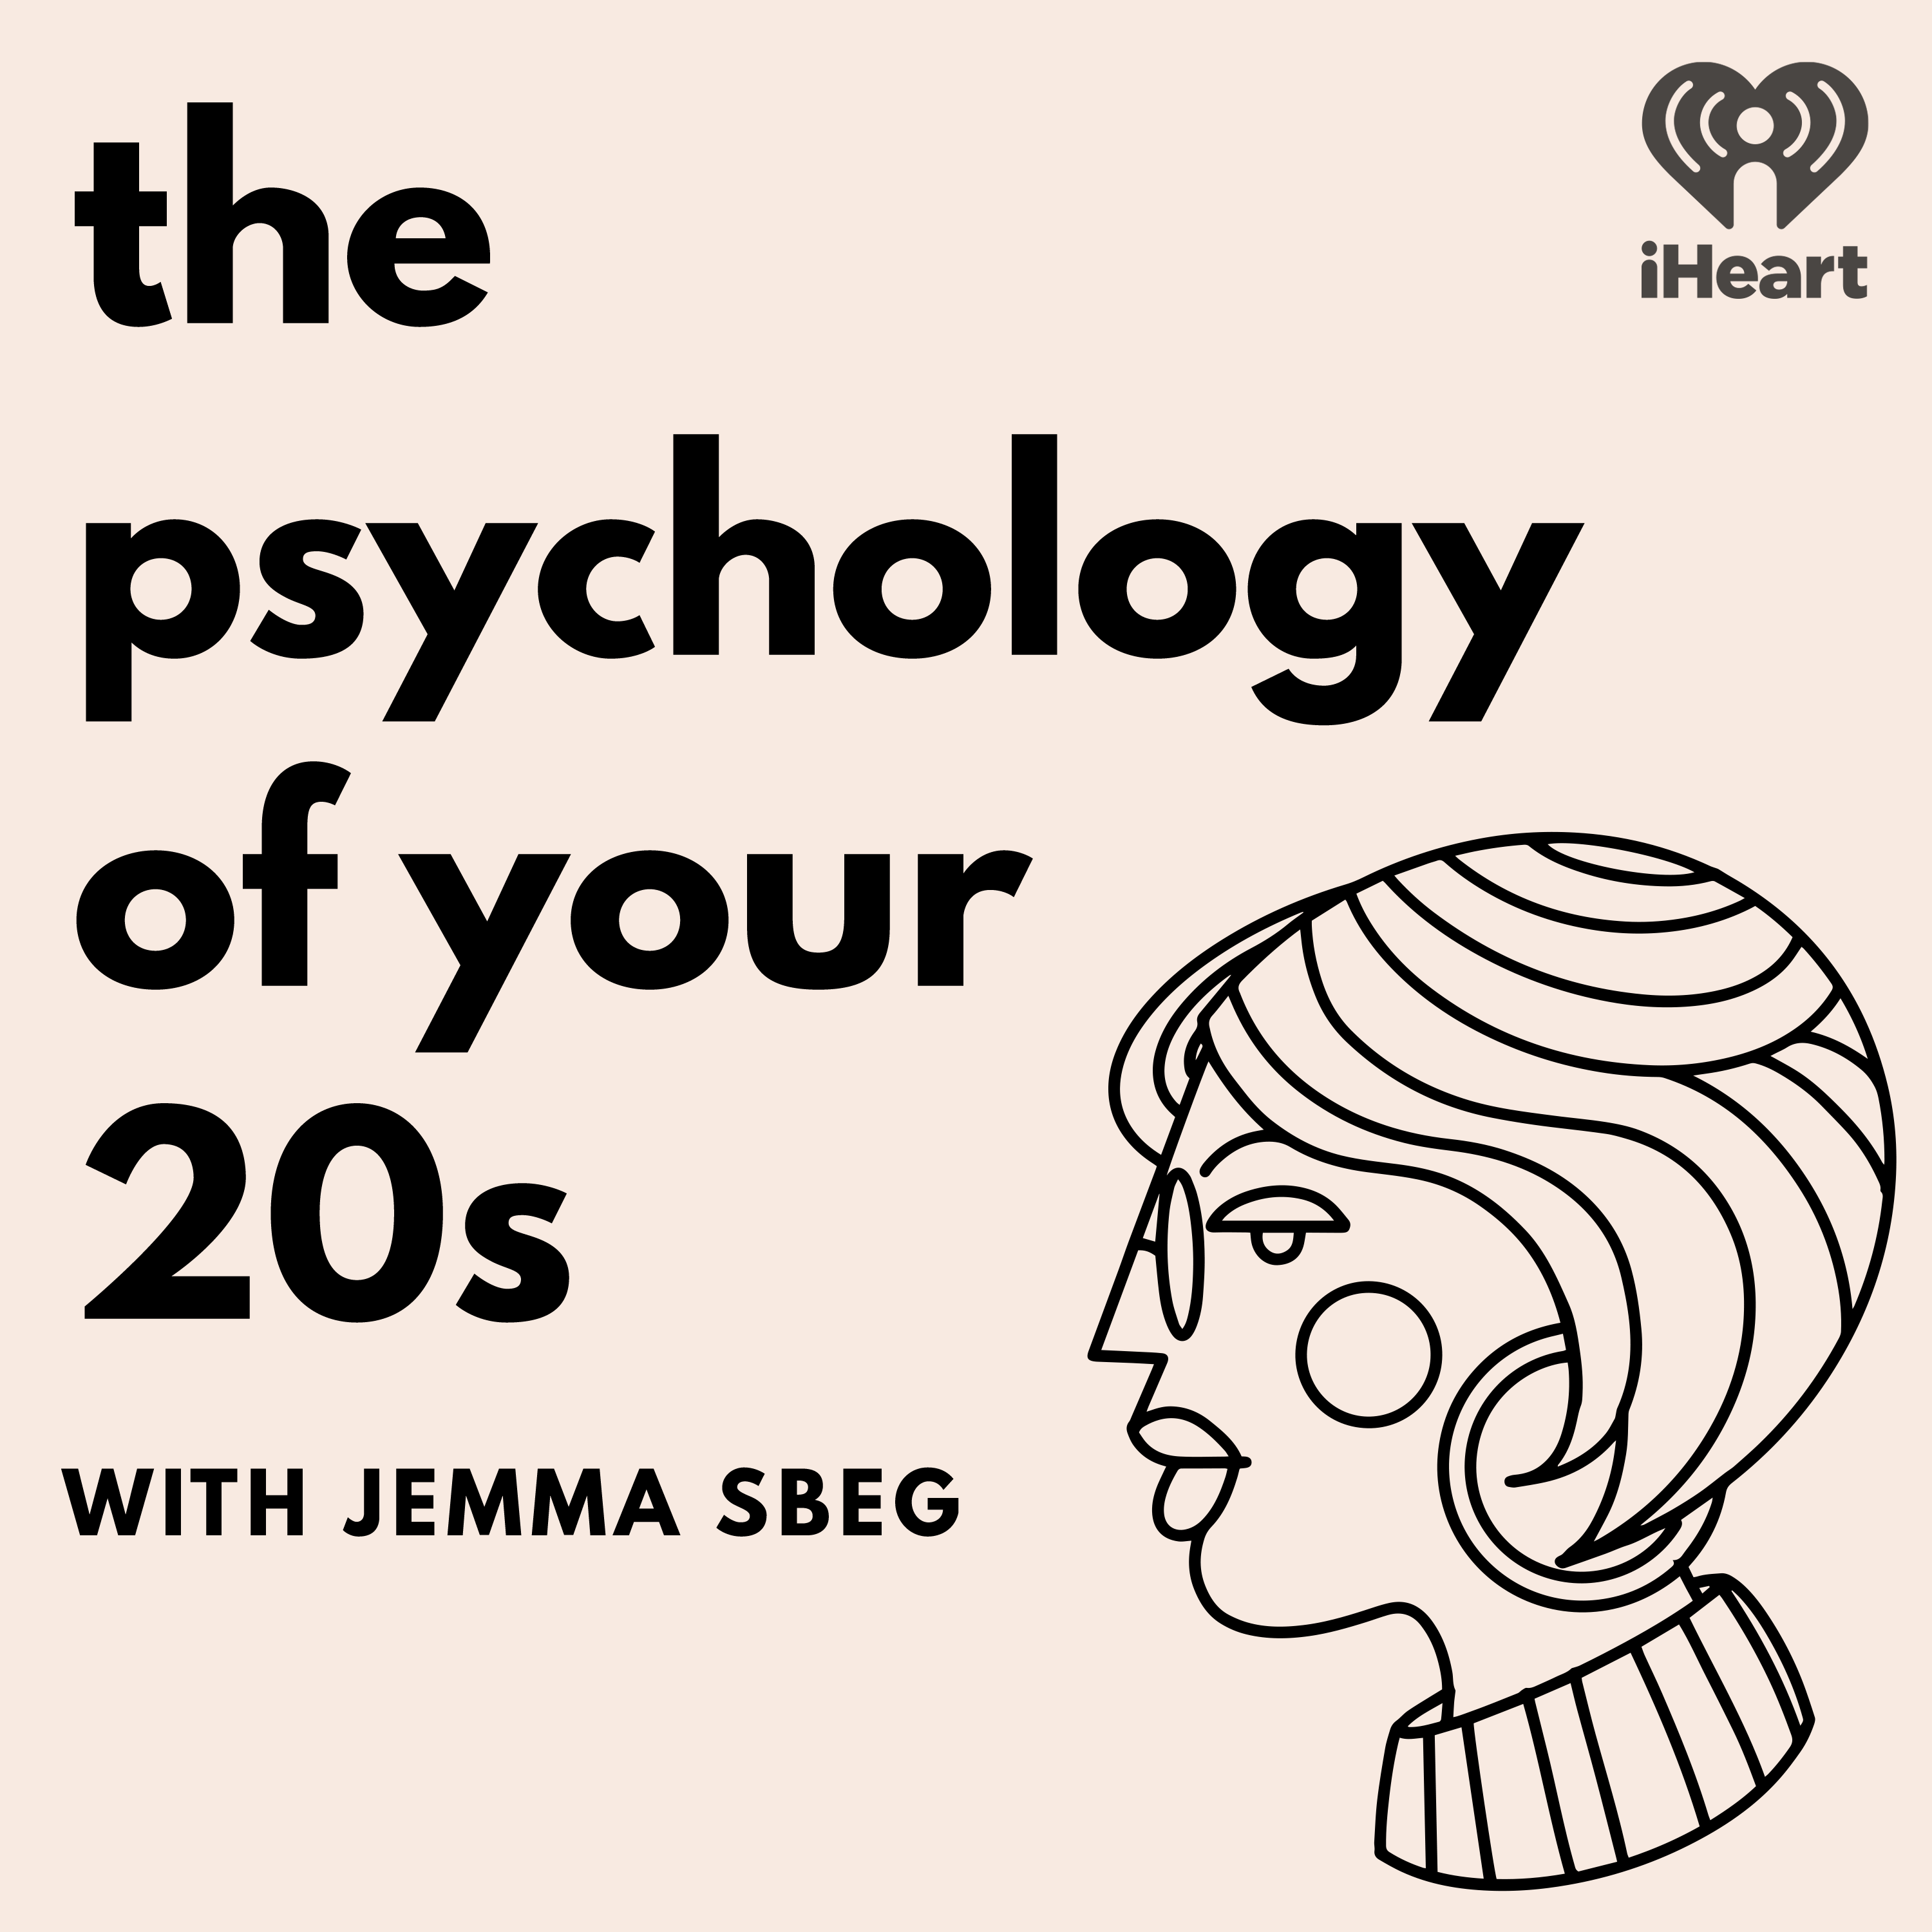 198. The psychology of ‘mommy issues’ and mother wounds